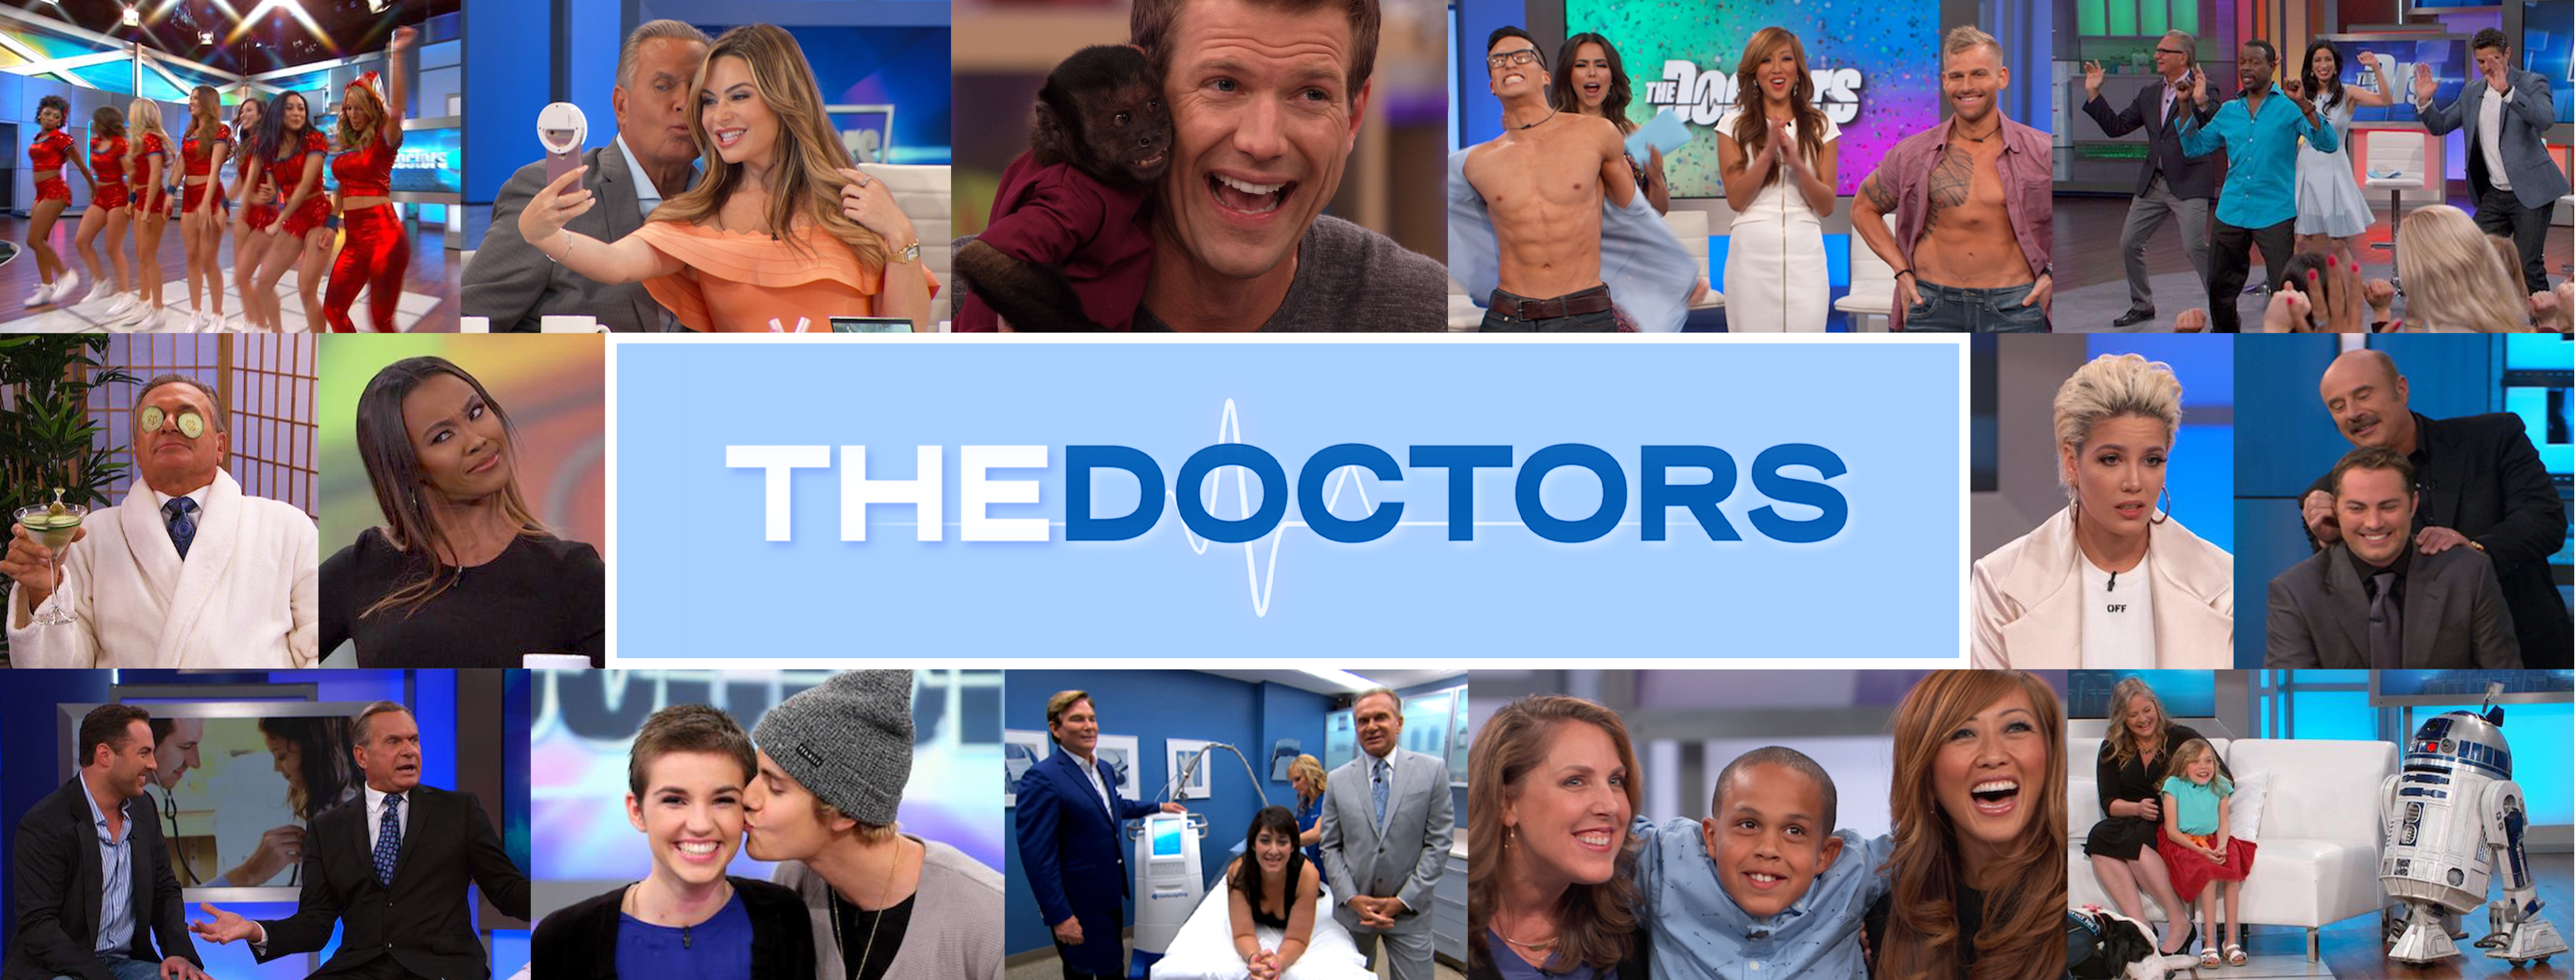 Embarrassing Plastic Surgery Results The Doctors TV Show